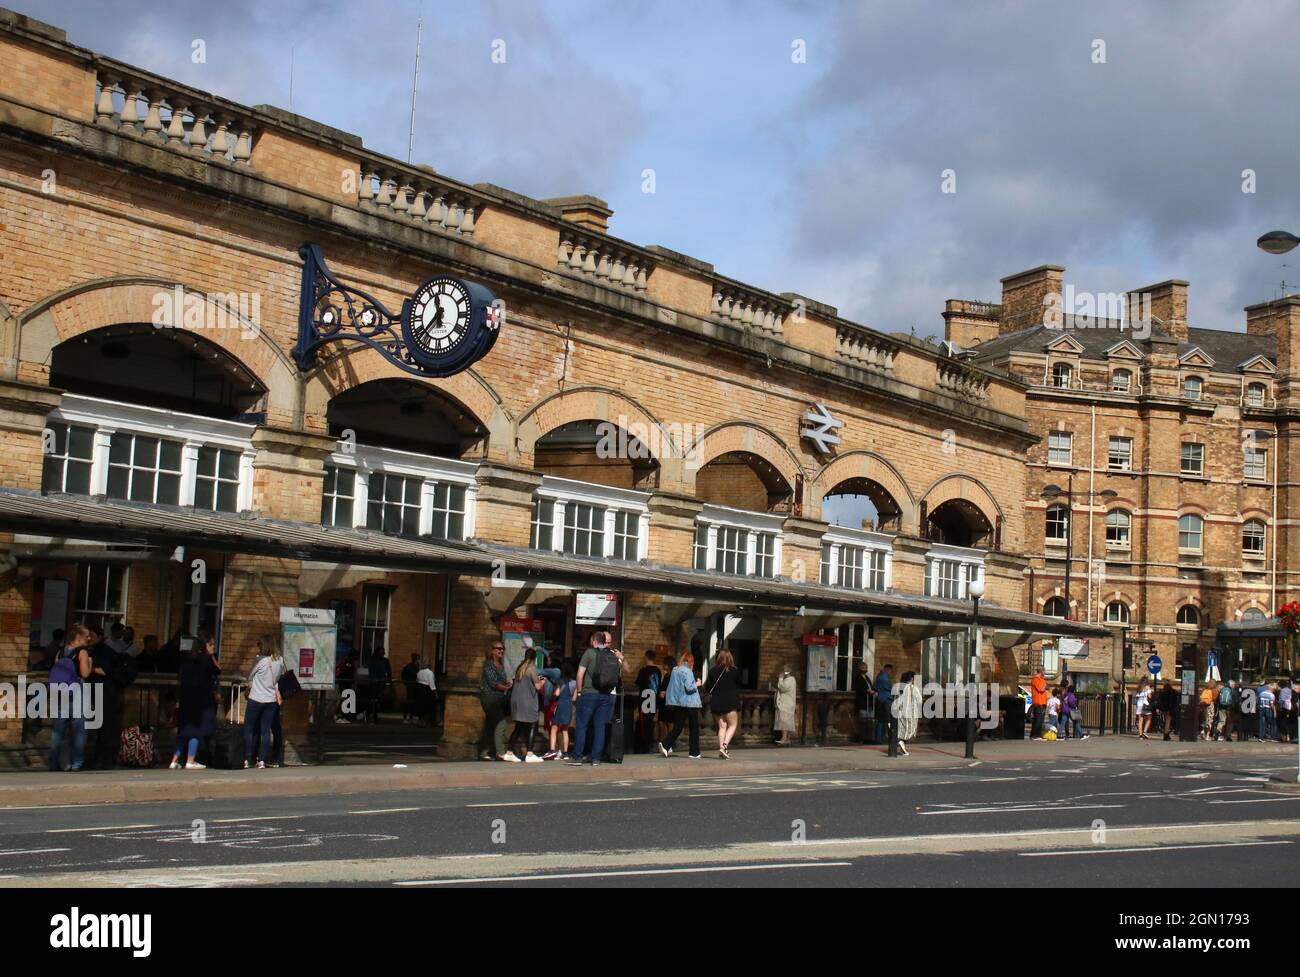 Exterior of the main entrance to York railway station with people, bus stop, station clock and British Rail double arrow logo, 11th September 2021. Stock Photo